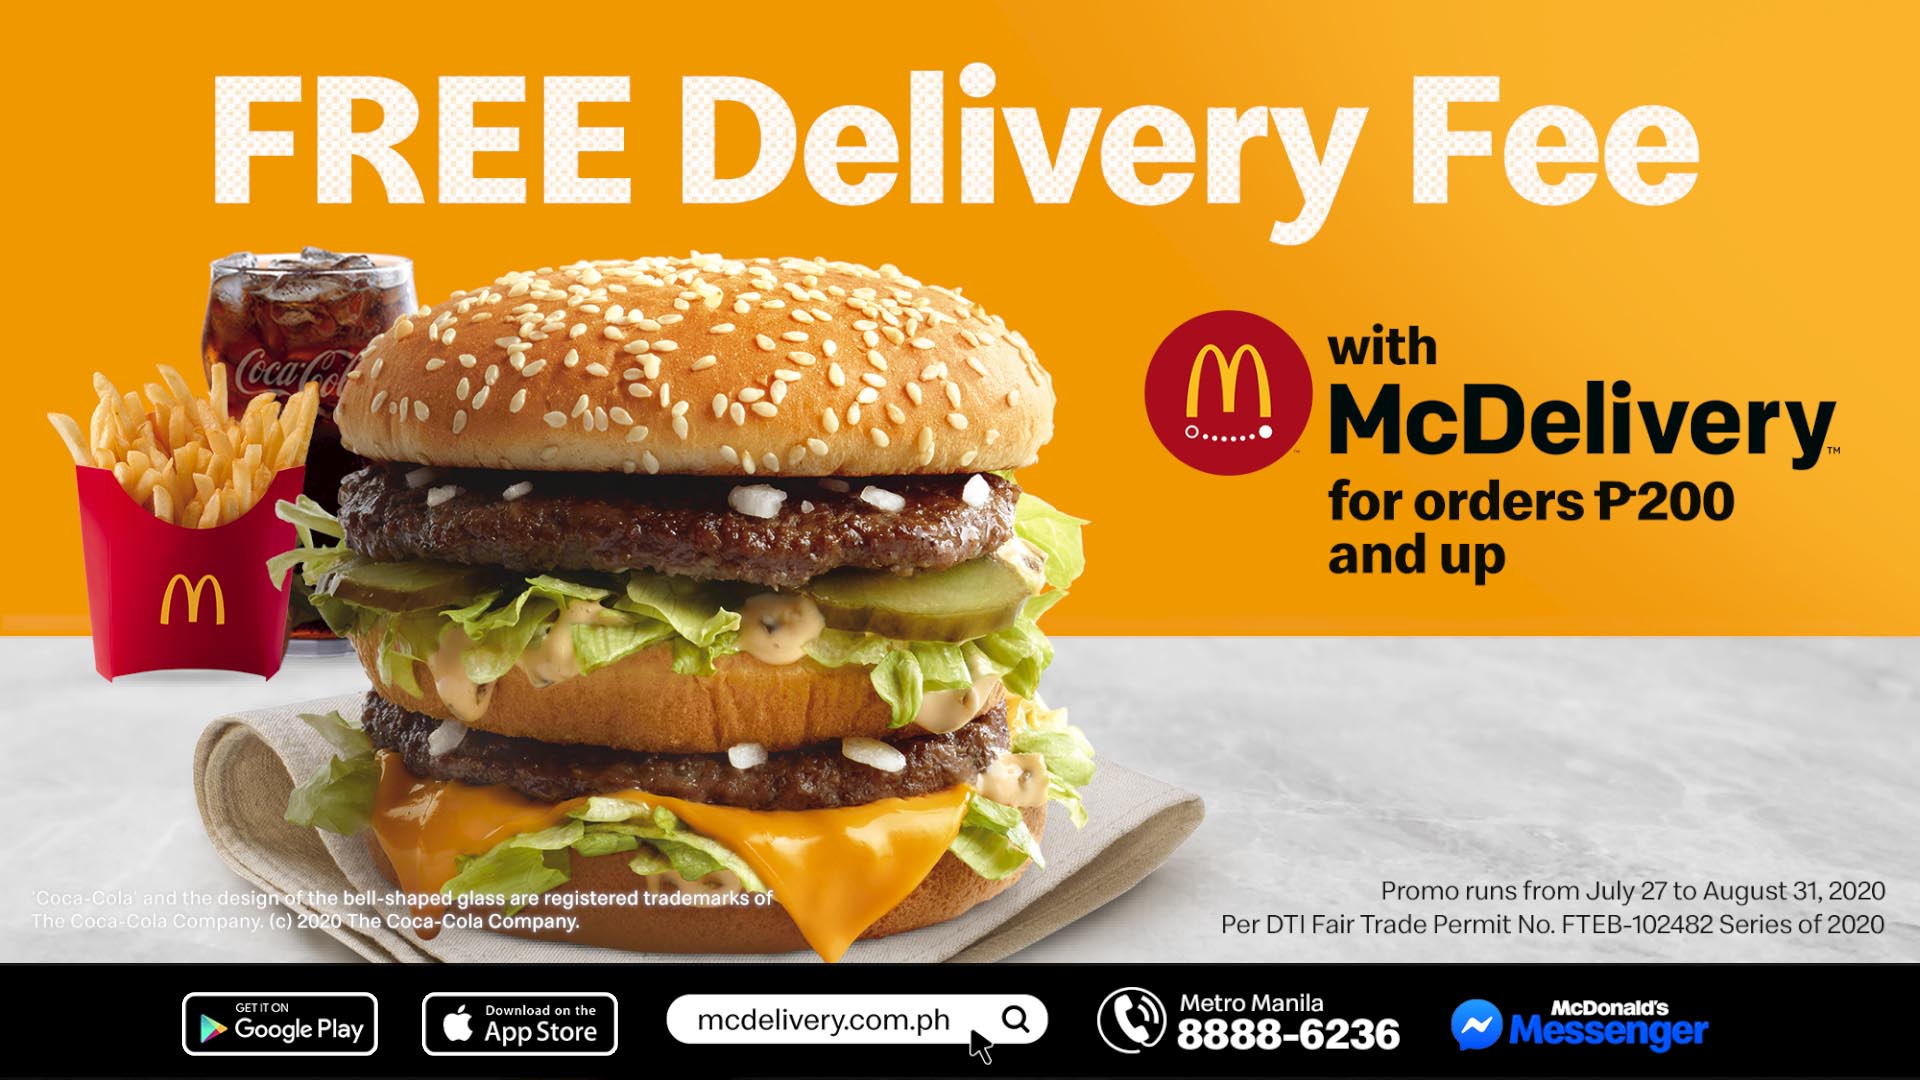 McDonald’s offers FREE Delivery Fee starting at Php200 only